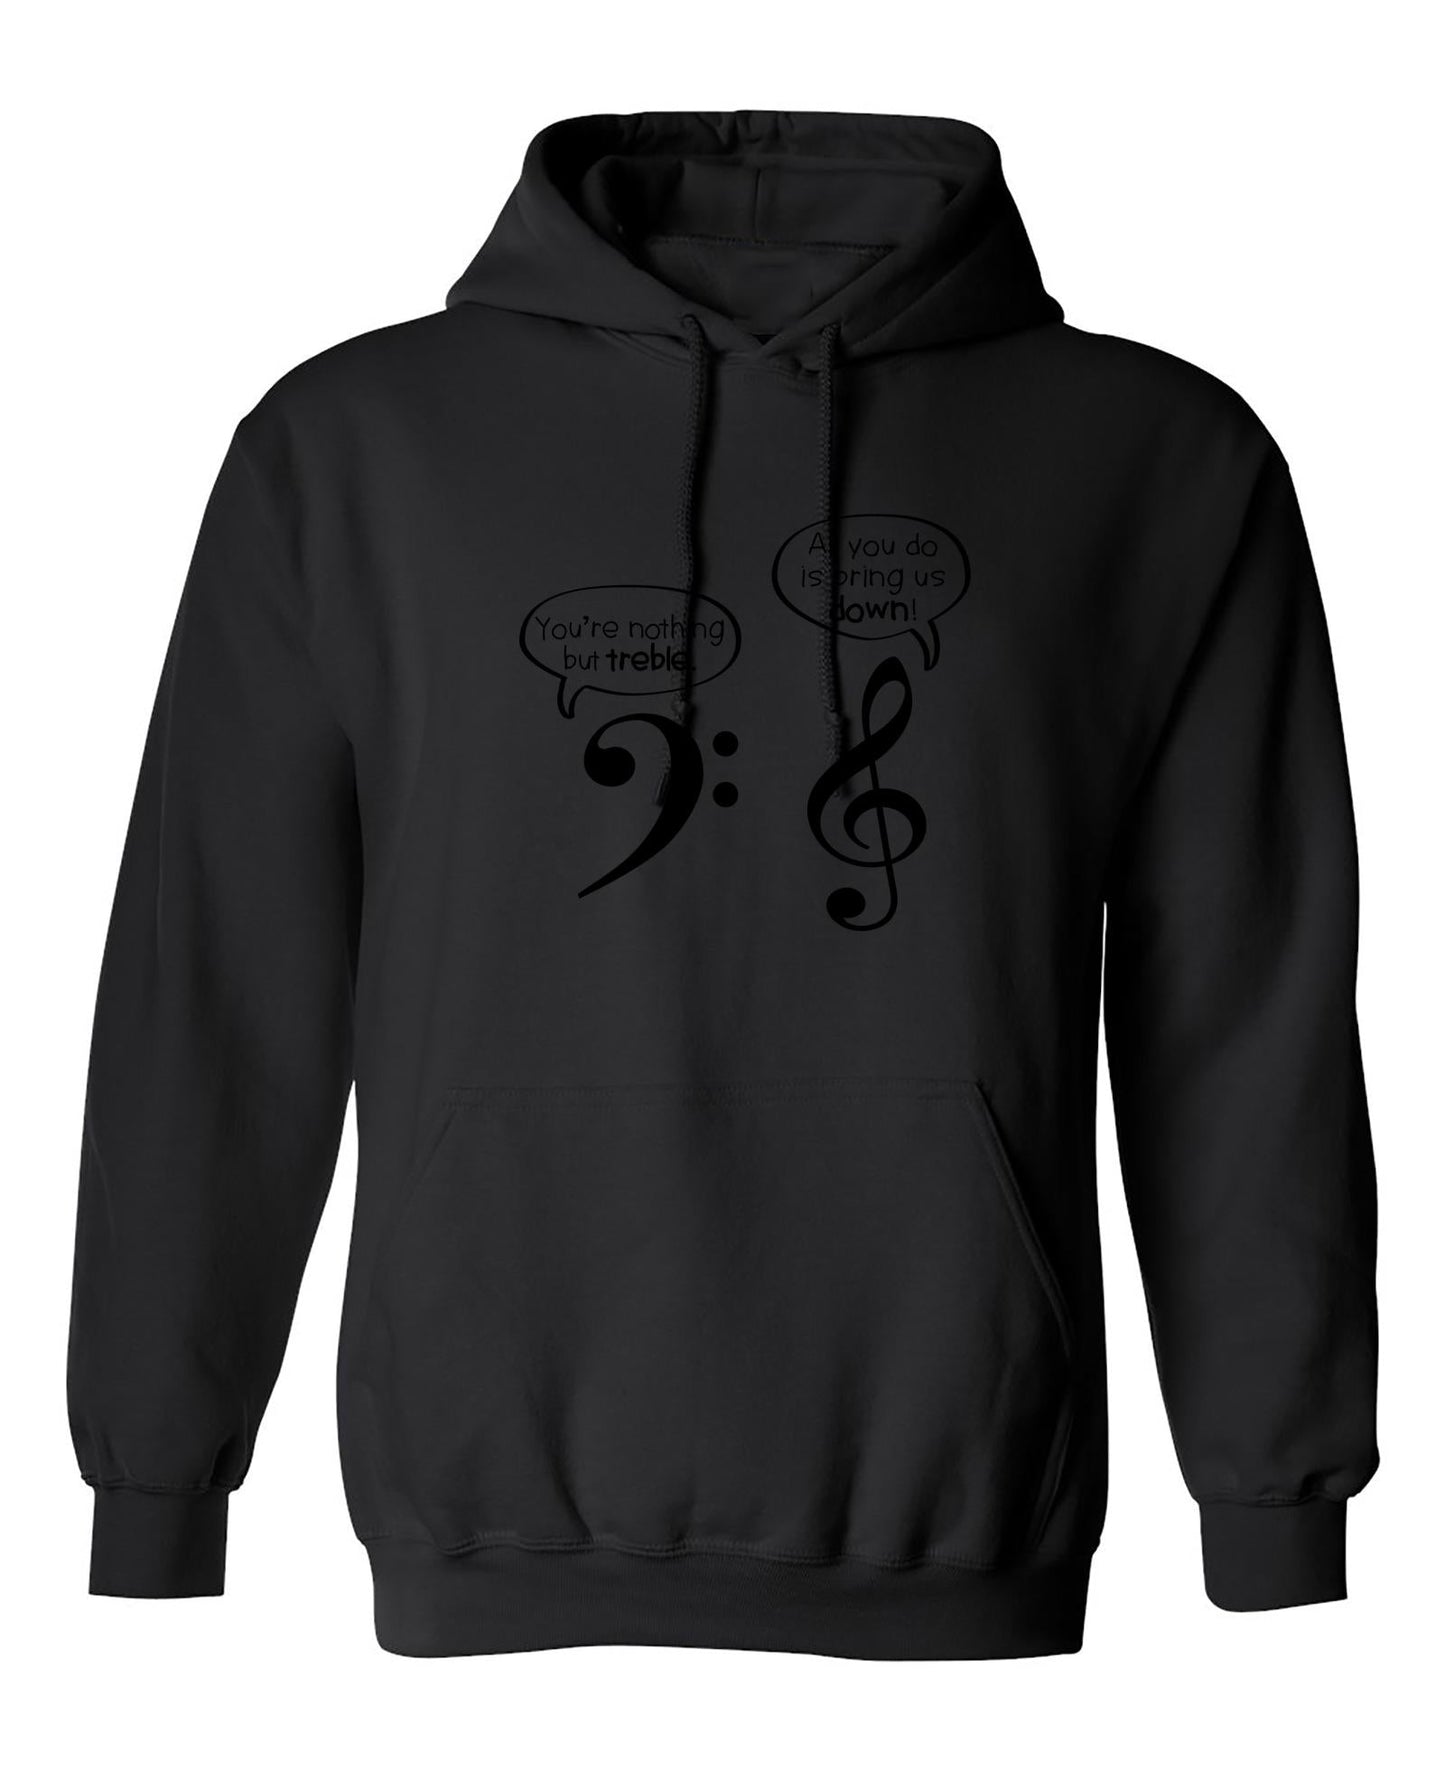 Funny T-Shirts design "You're Nothing But Treble"